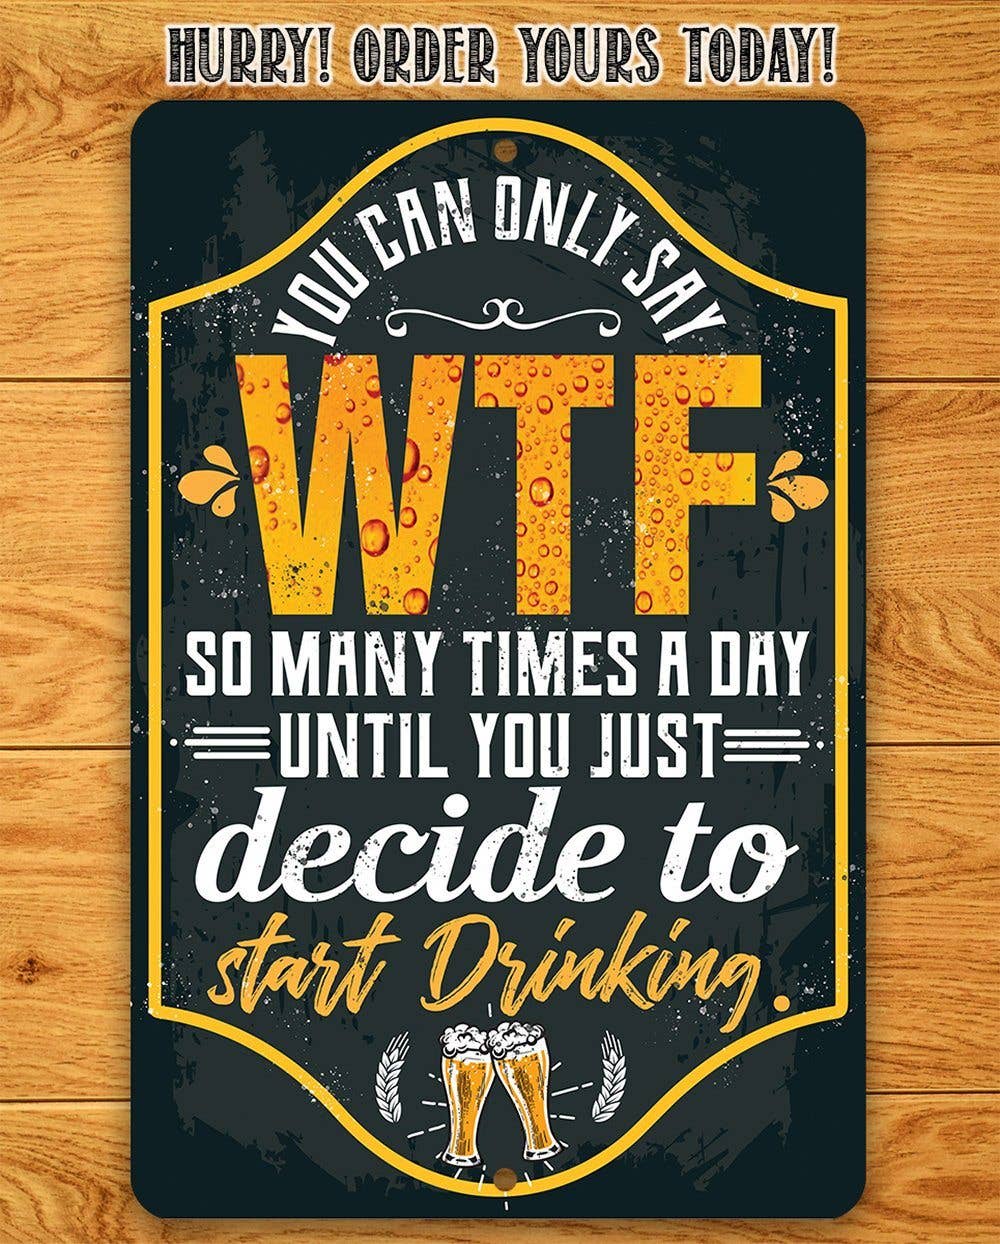 You Can Only Say WTF - Metal Sign: 8 x 12